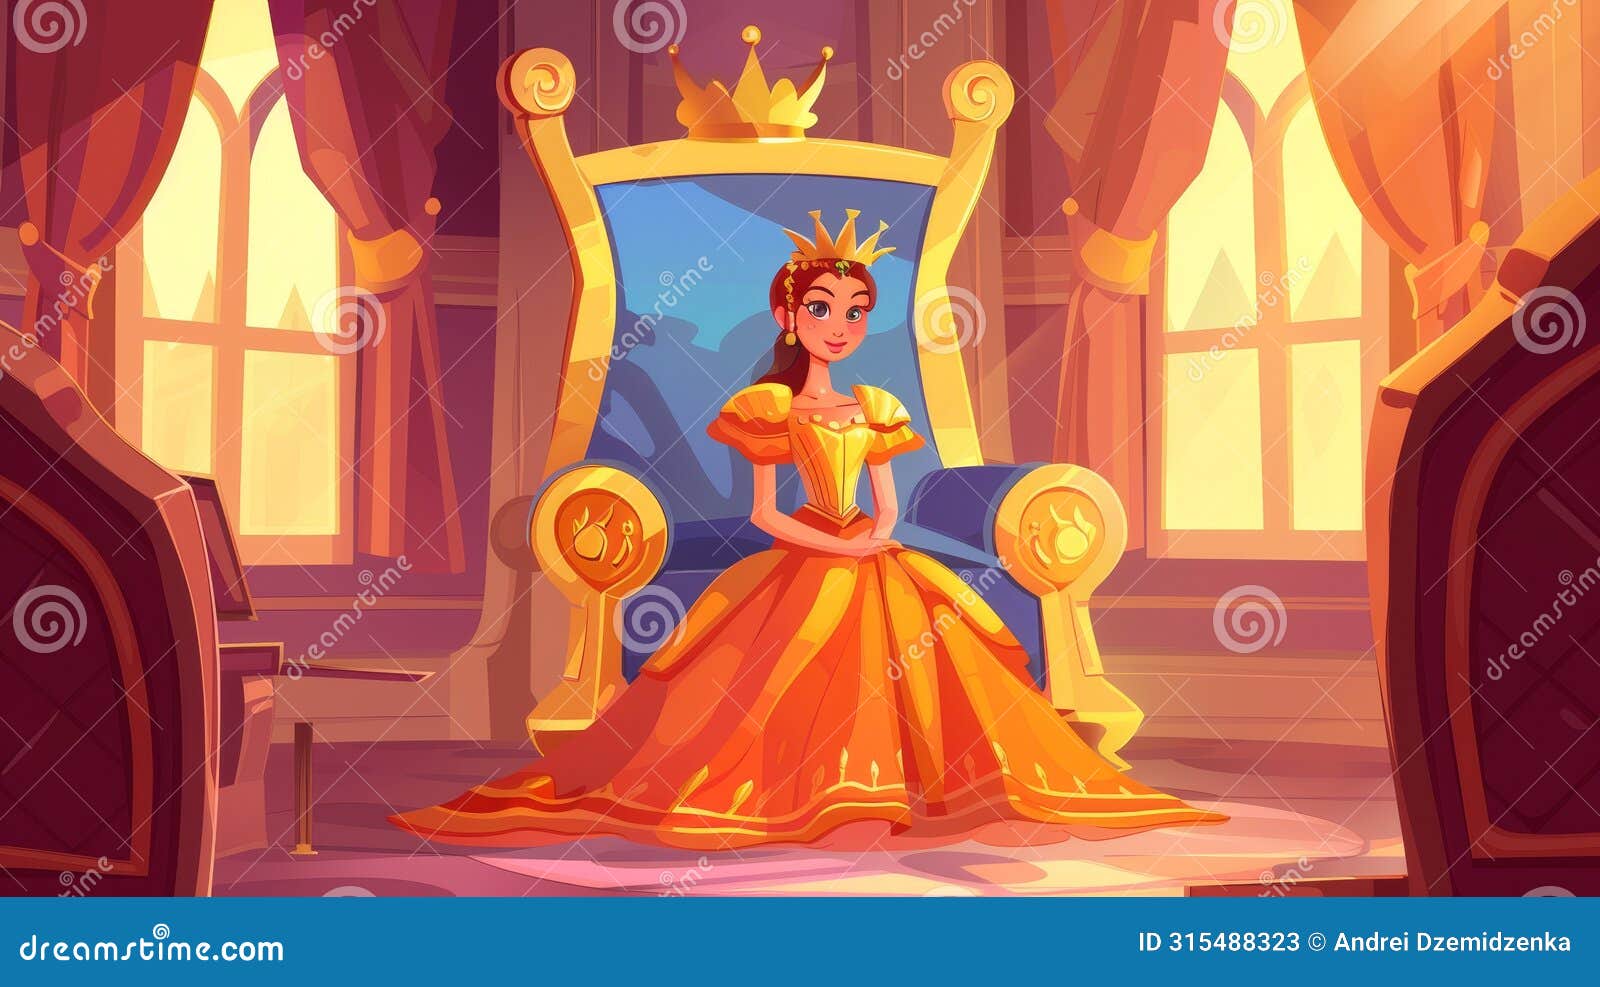 involving a fairytale female personage, a queen in a palace, medieval throne room interior, monarchy cartoon character